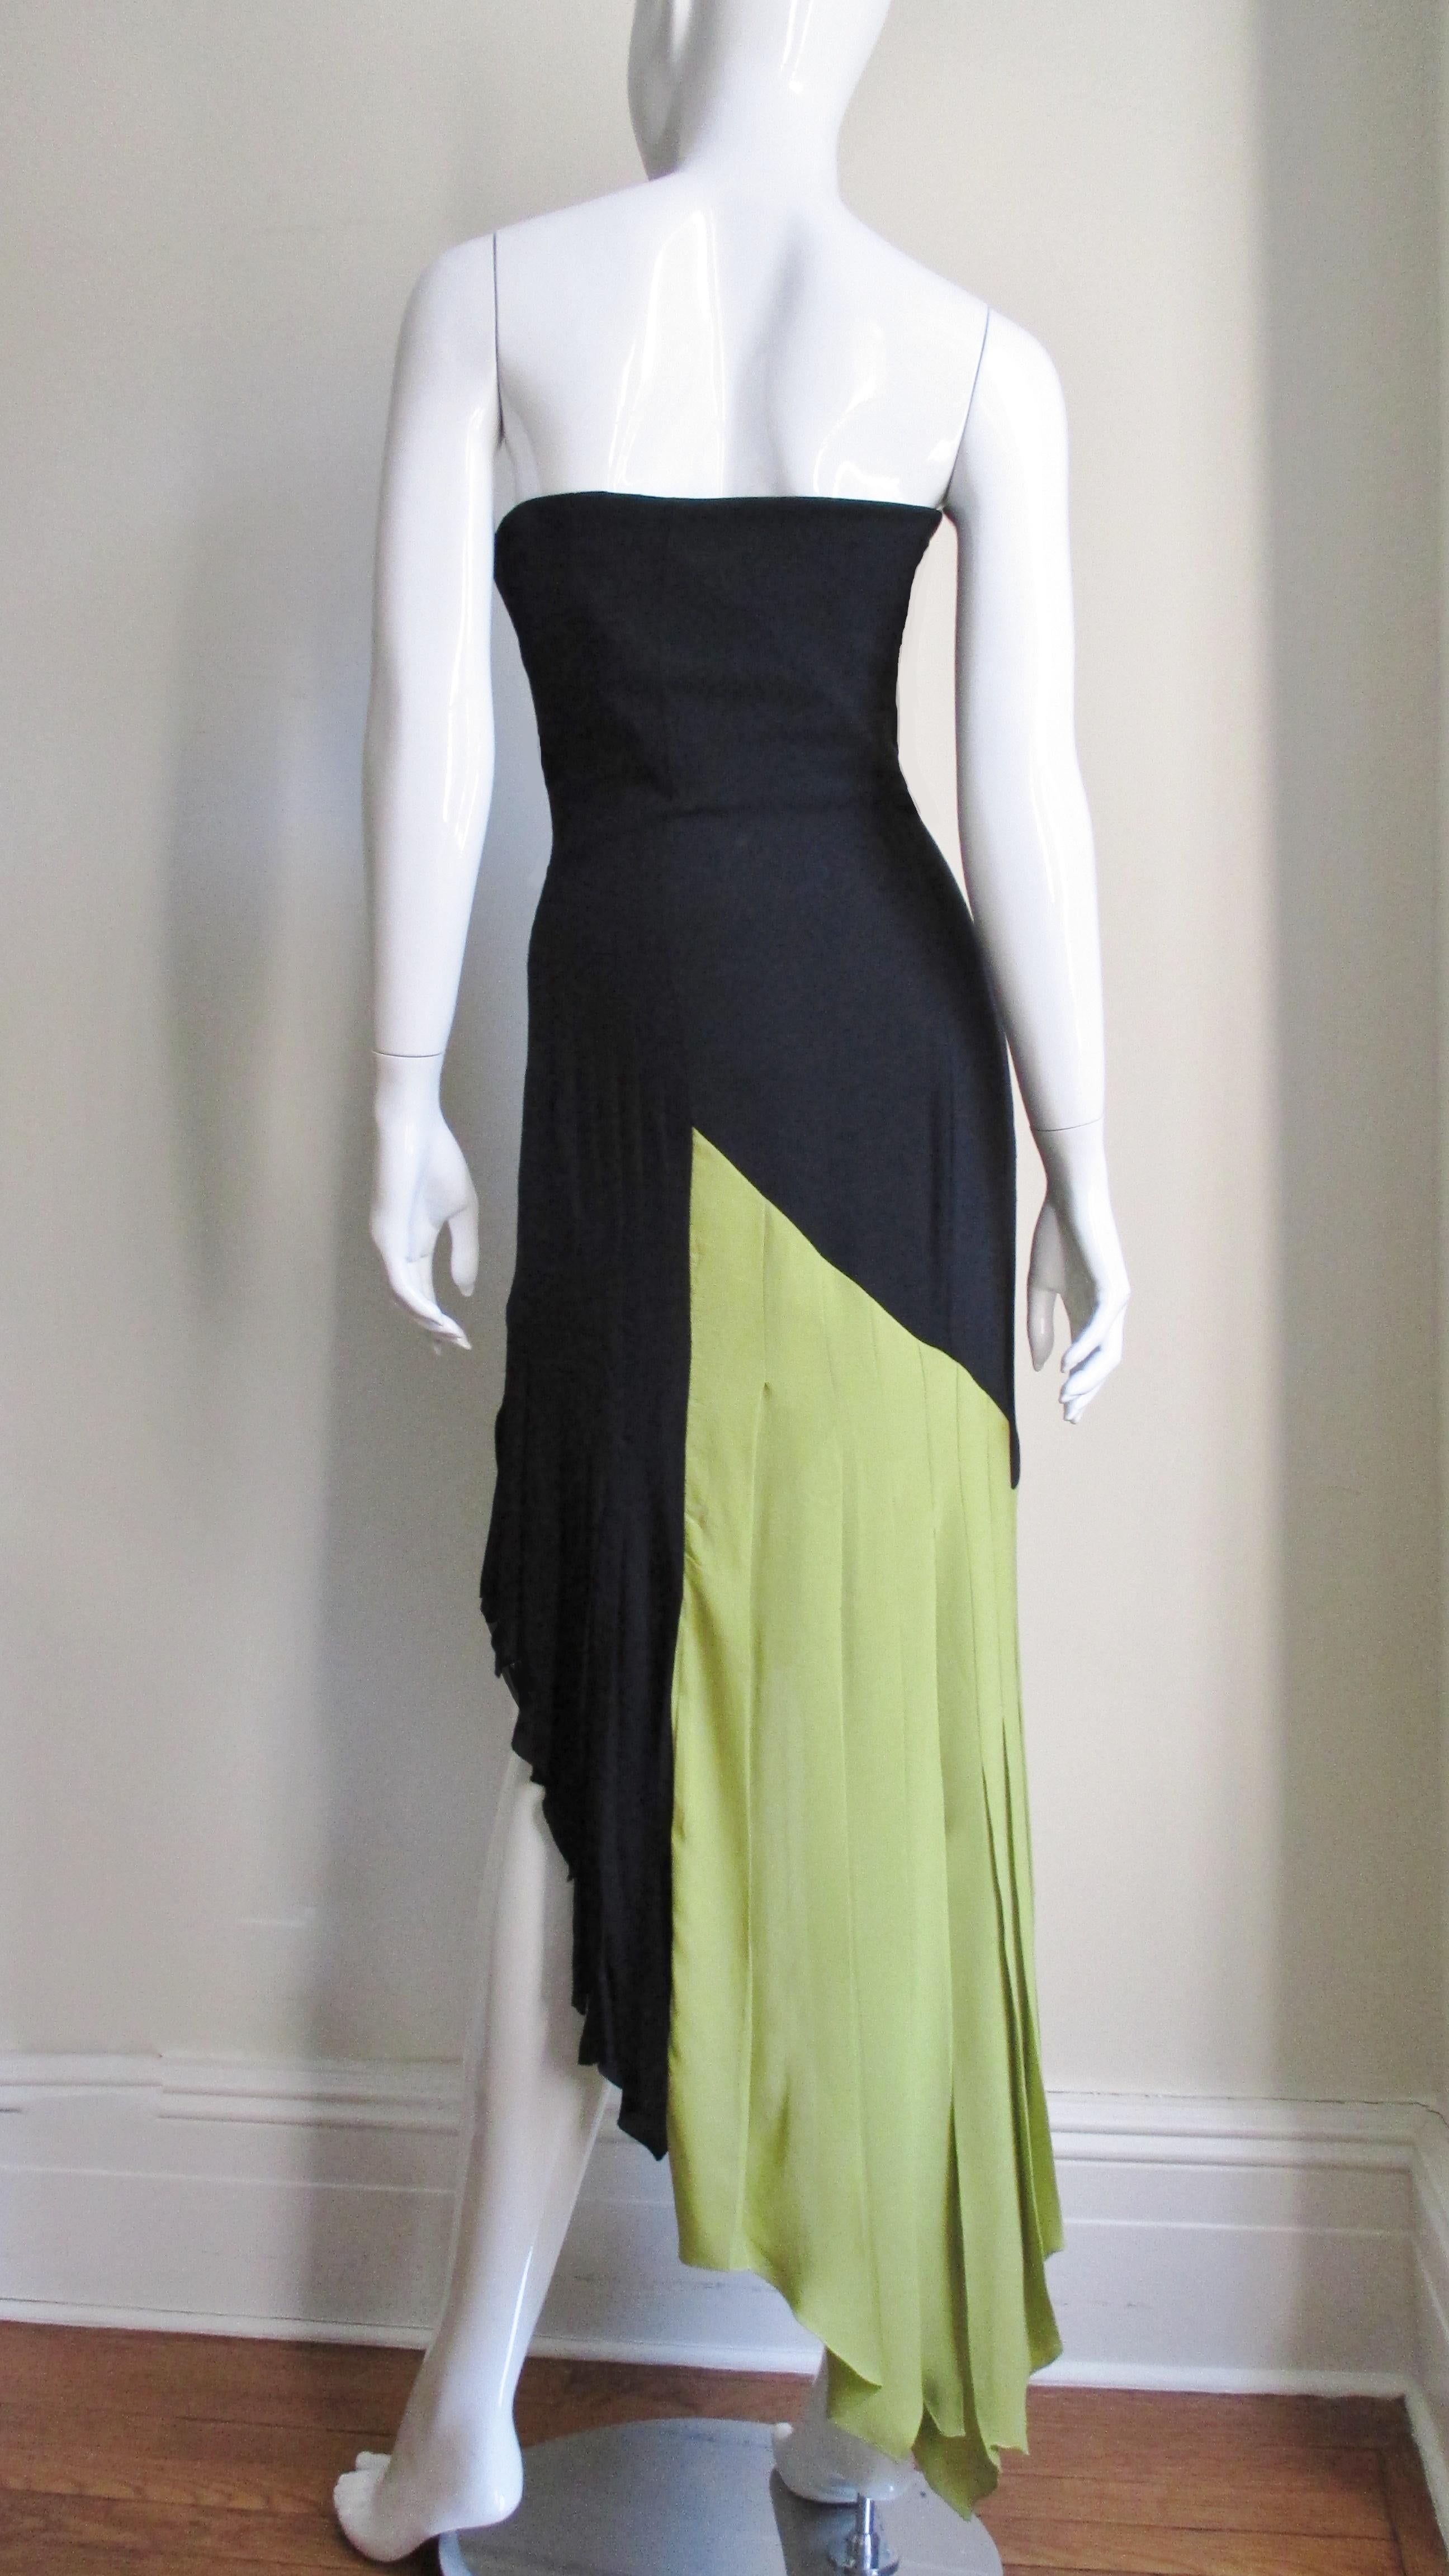 Gianni Versace New Color Block Strapless Dress 1990s For Sale 1